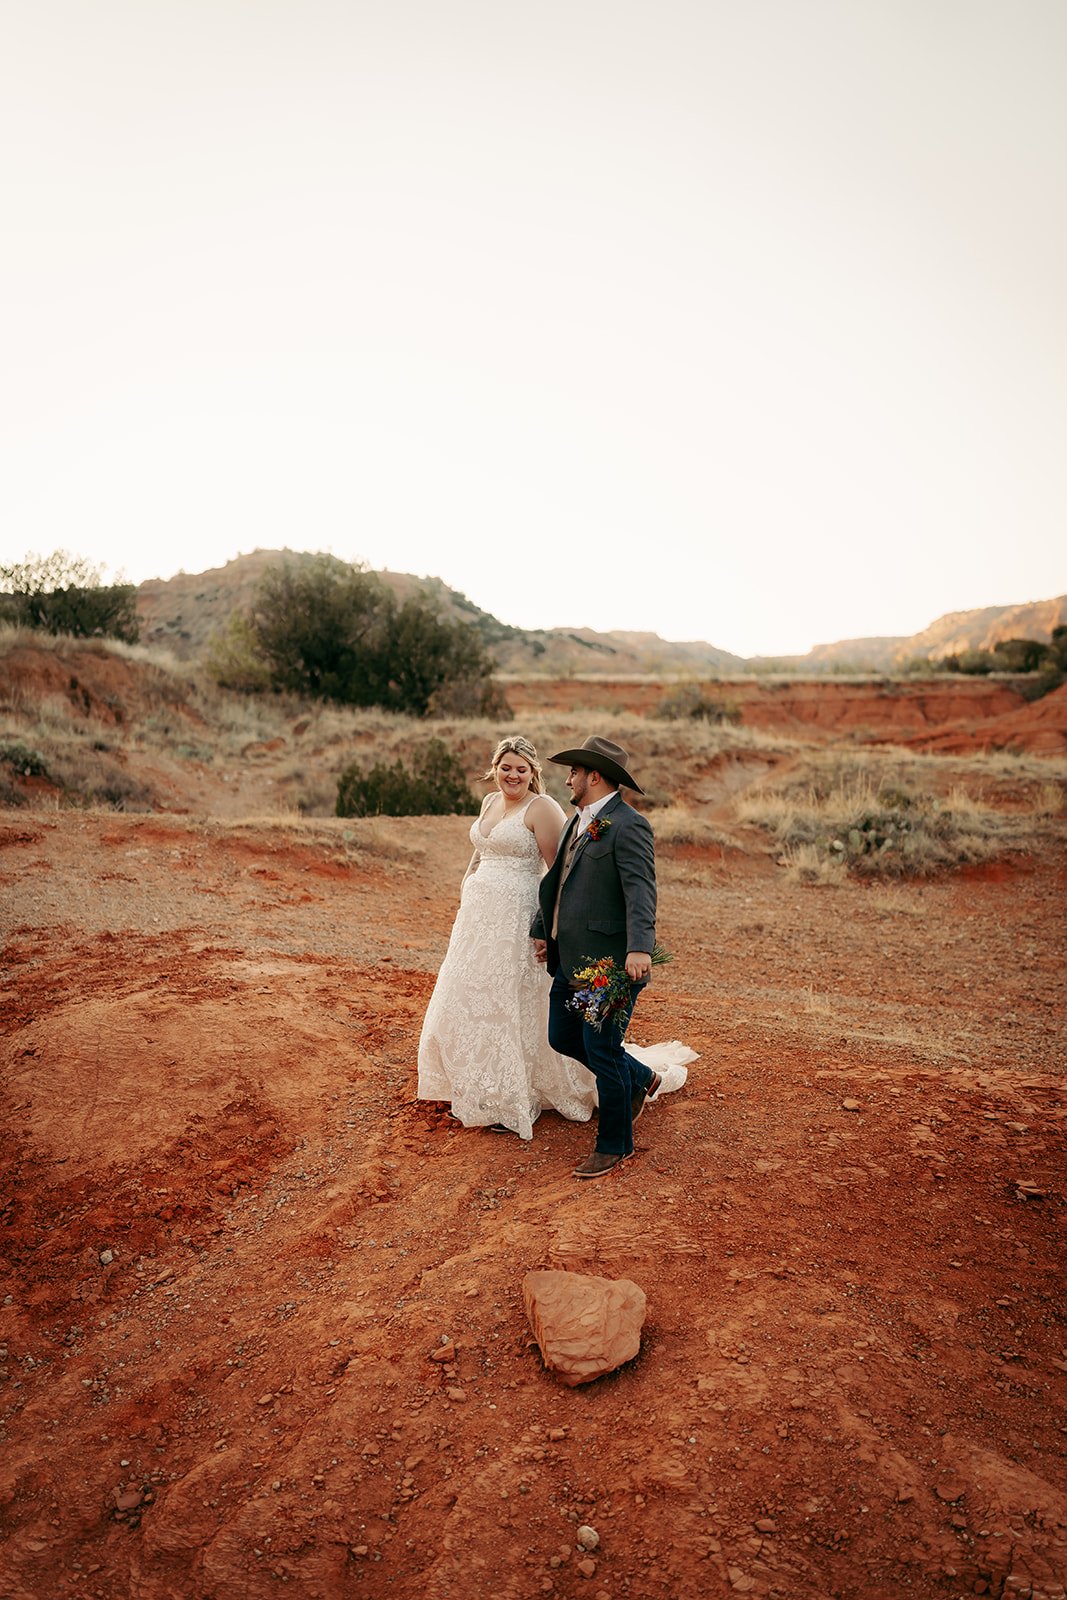 Eloping at Palo Duro Canyon State Park: Mini Guide